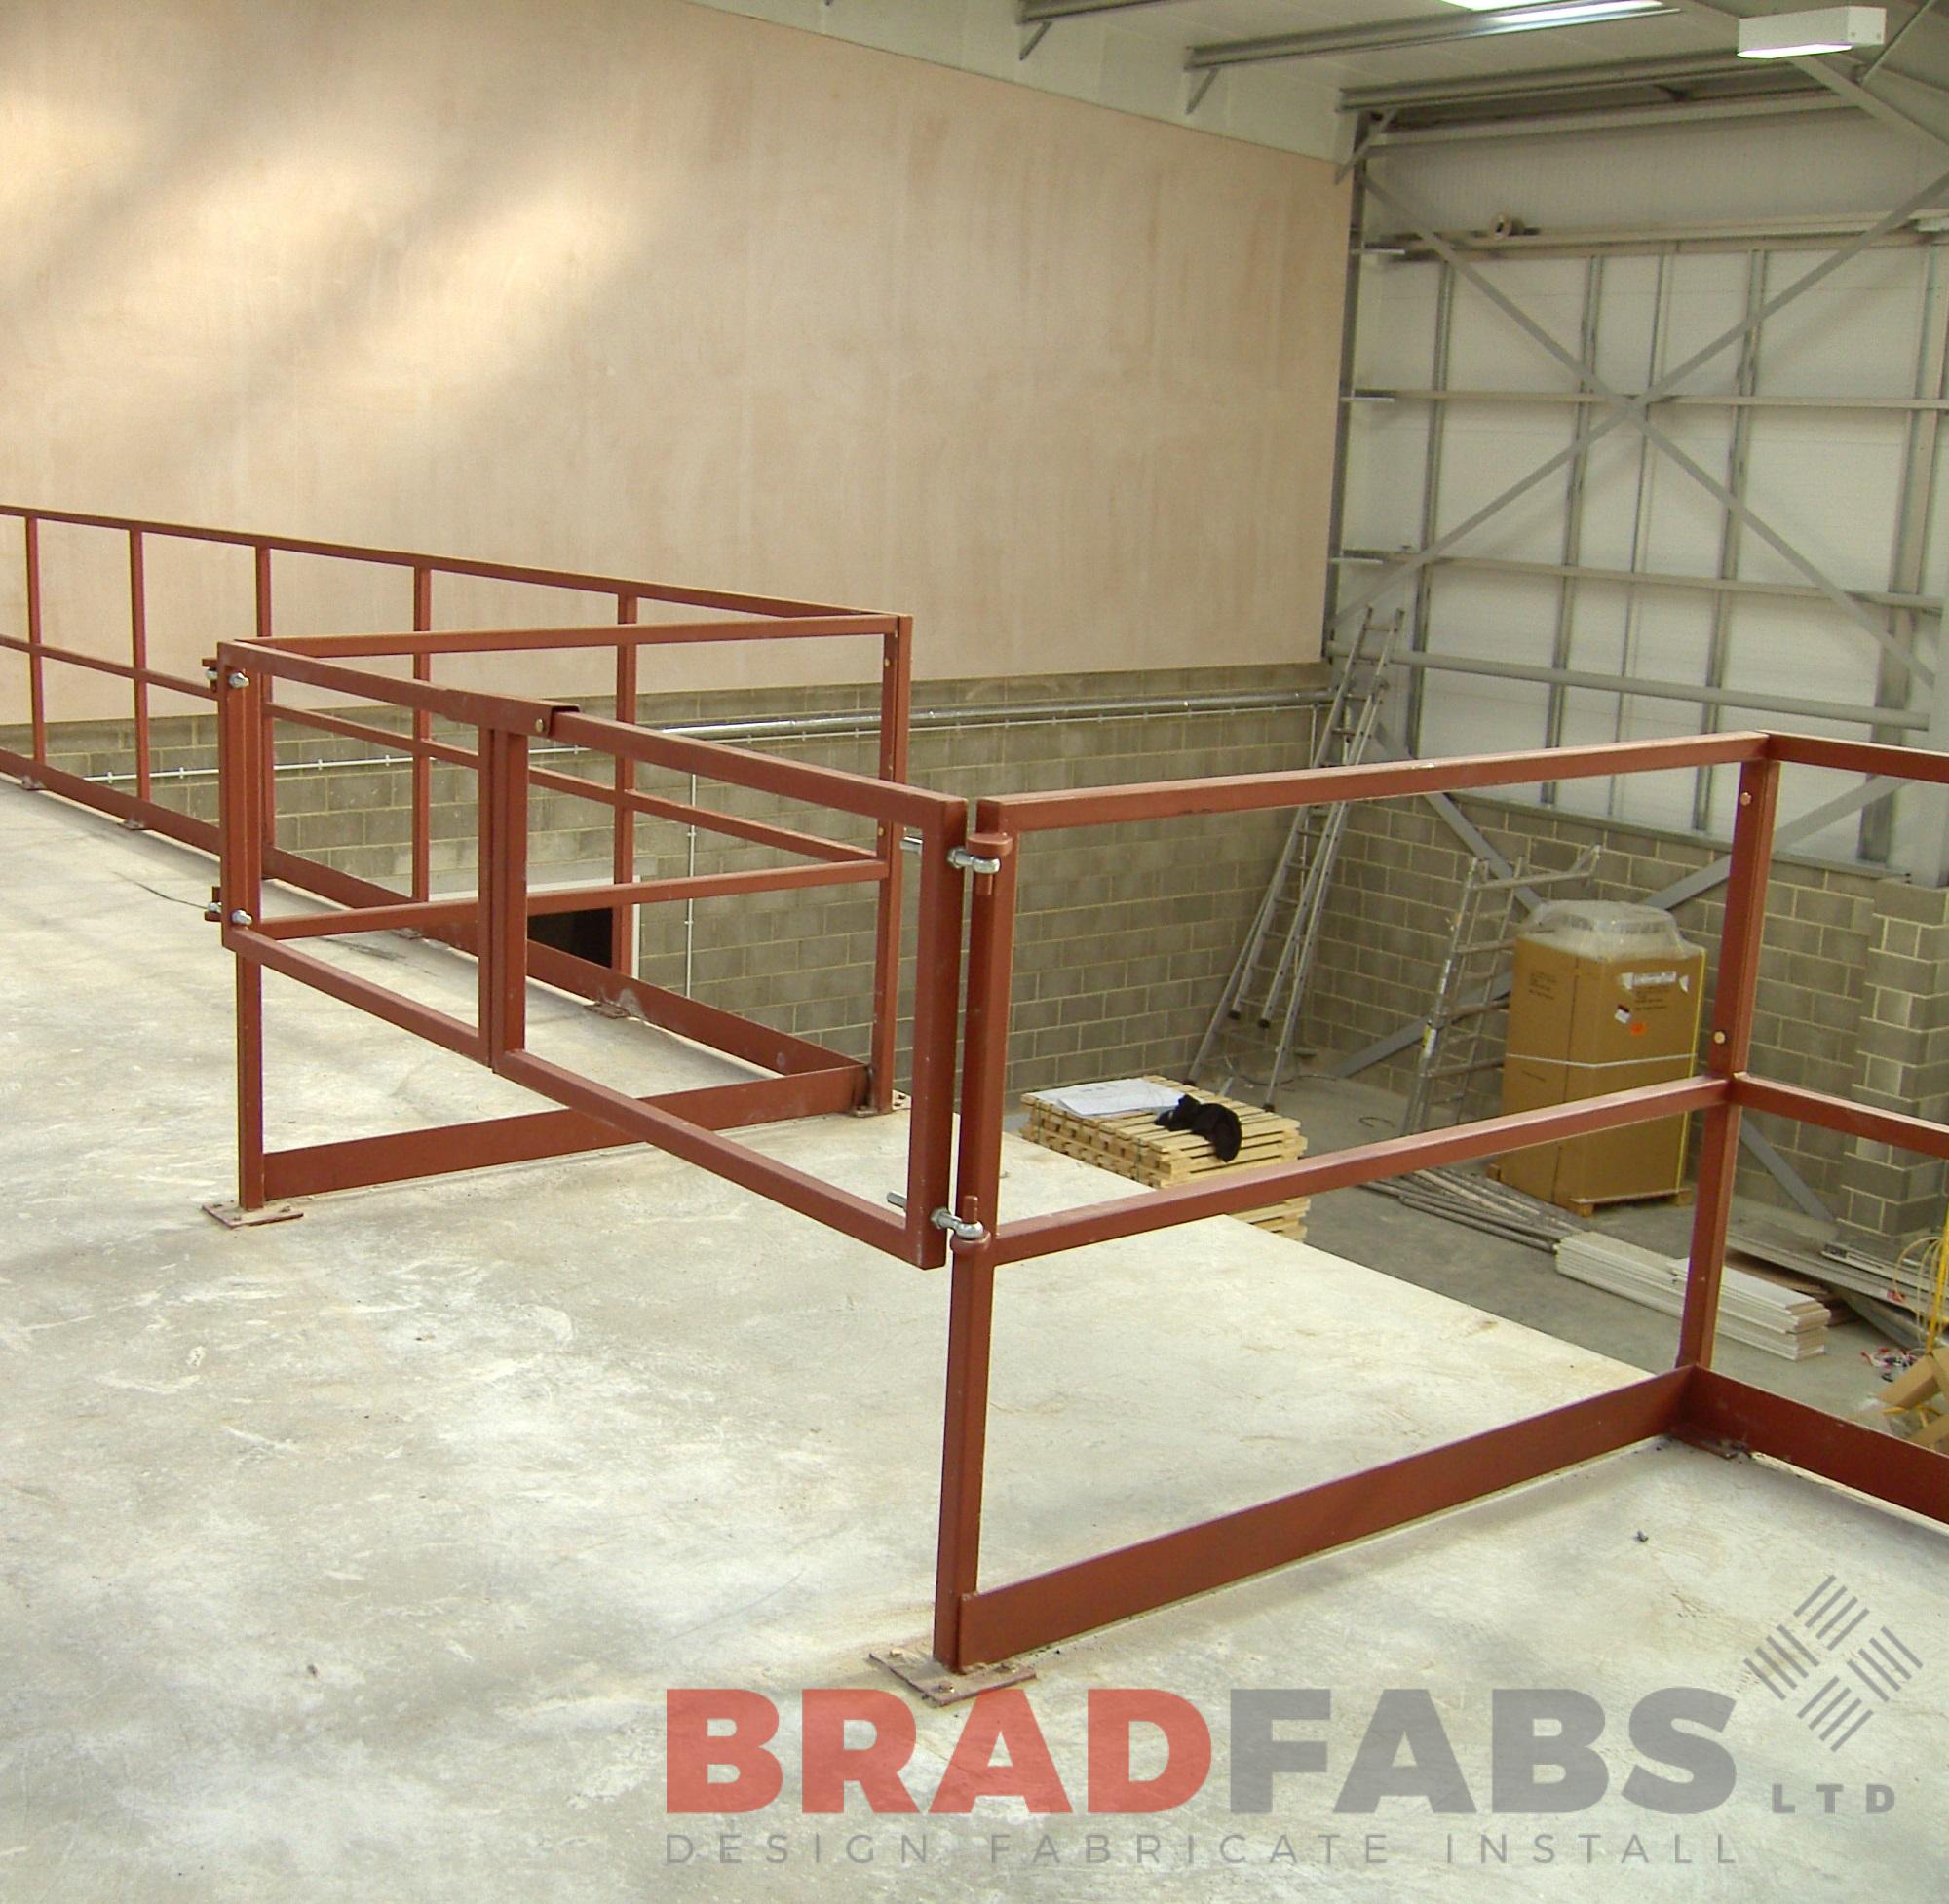 mild steel internal gates powder coated. Designed, supplied and installed by bradfabs 